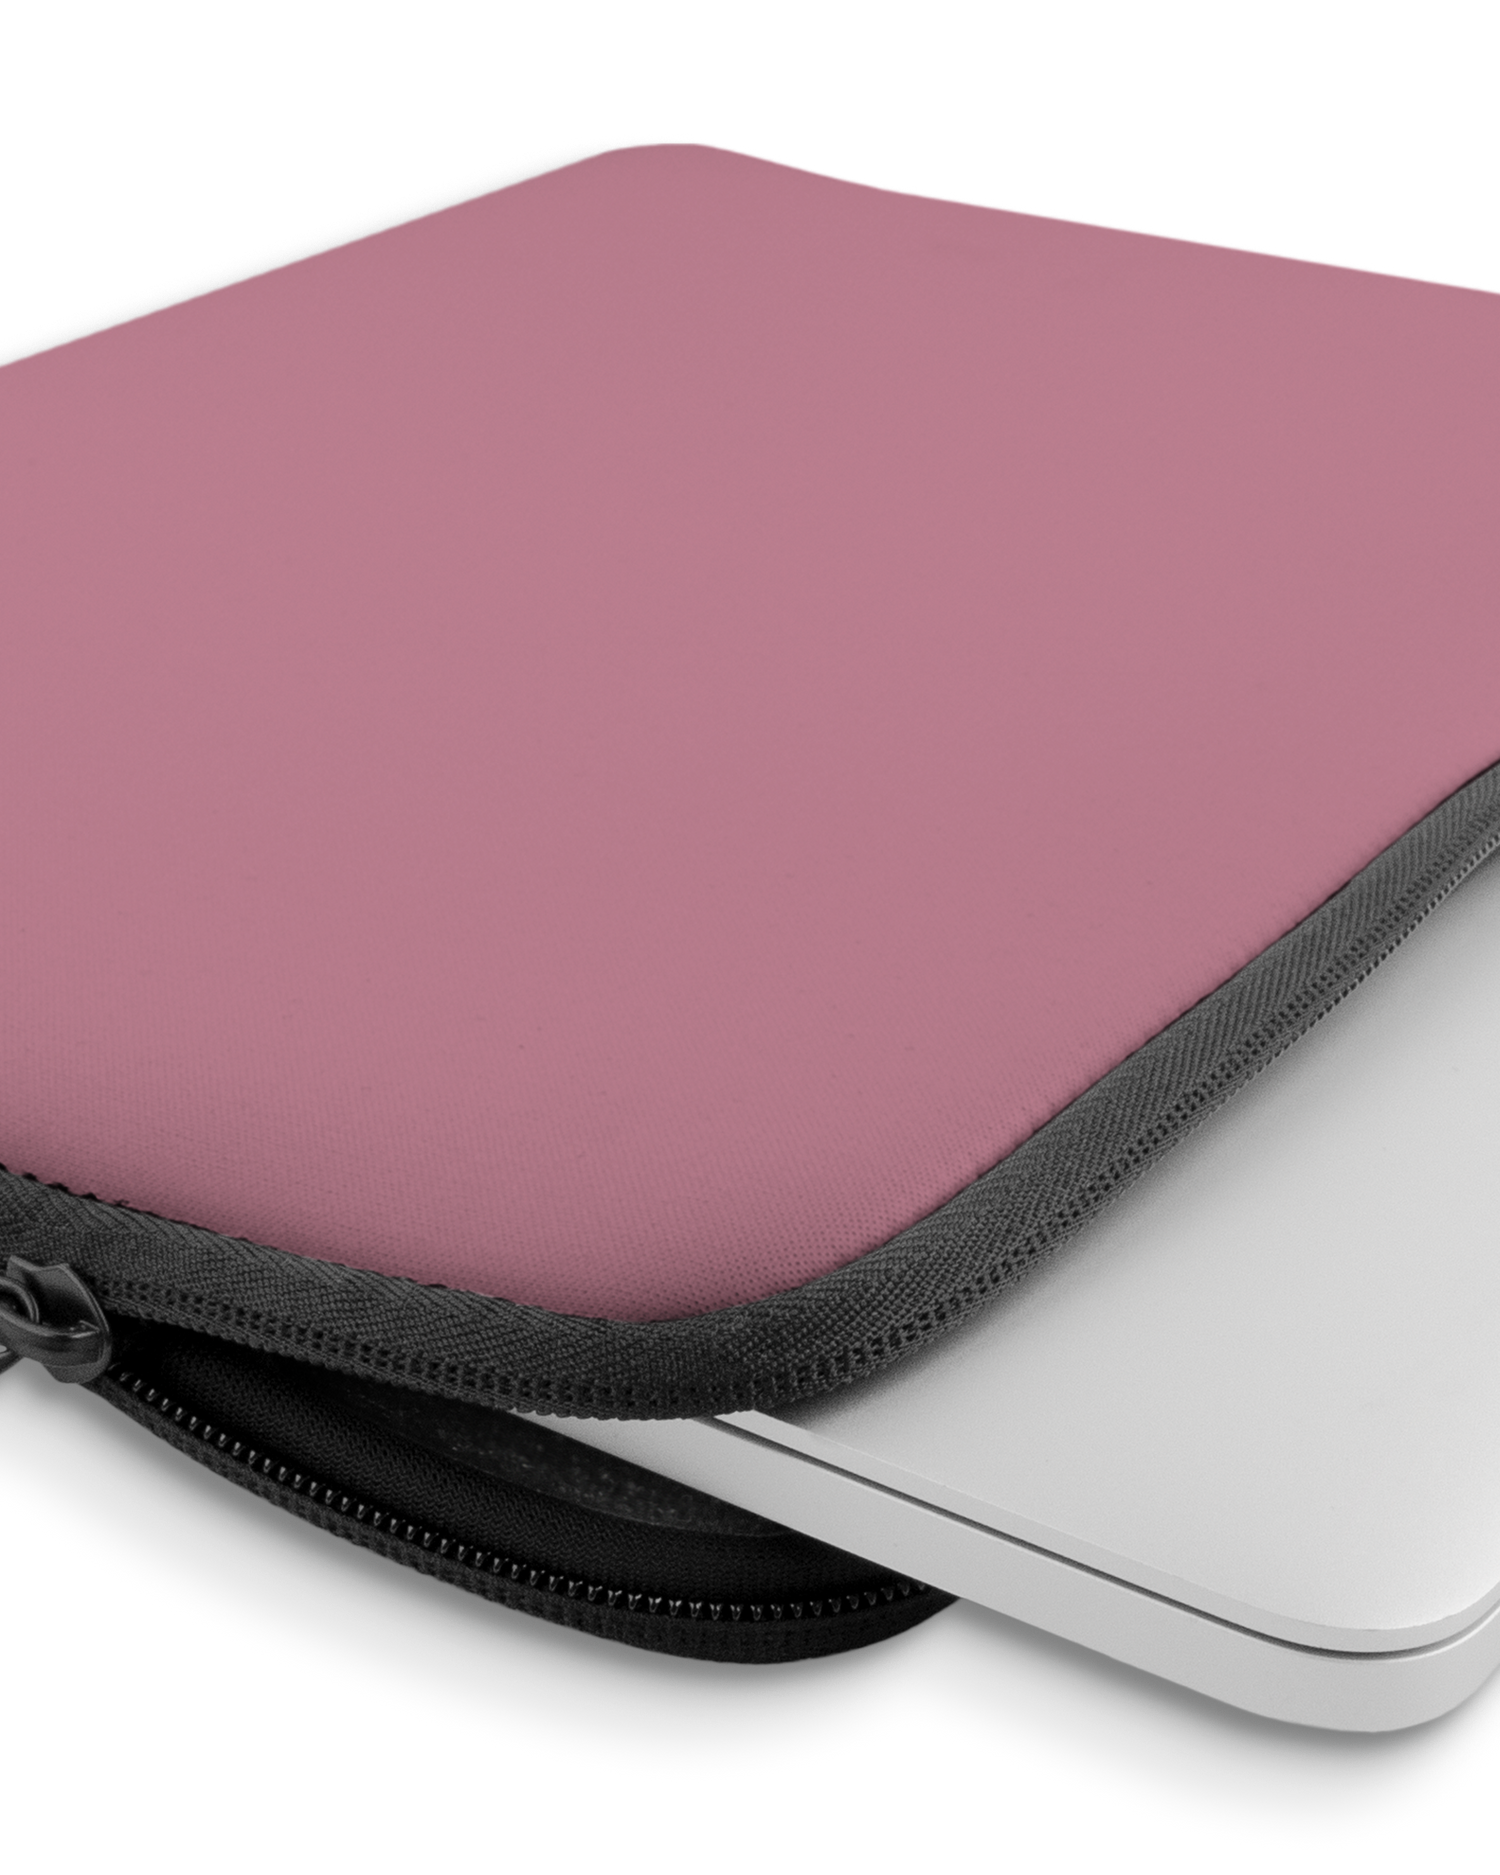 WILD ROSE Laptop Case 13-14 inch with device inside